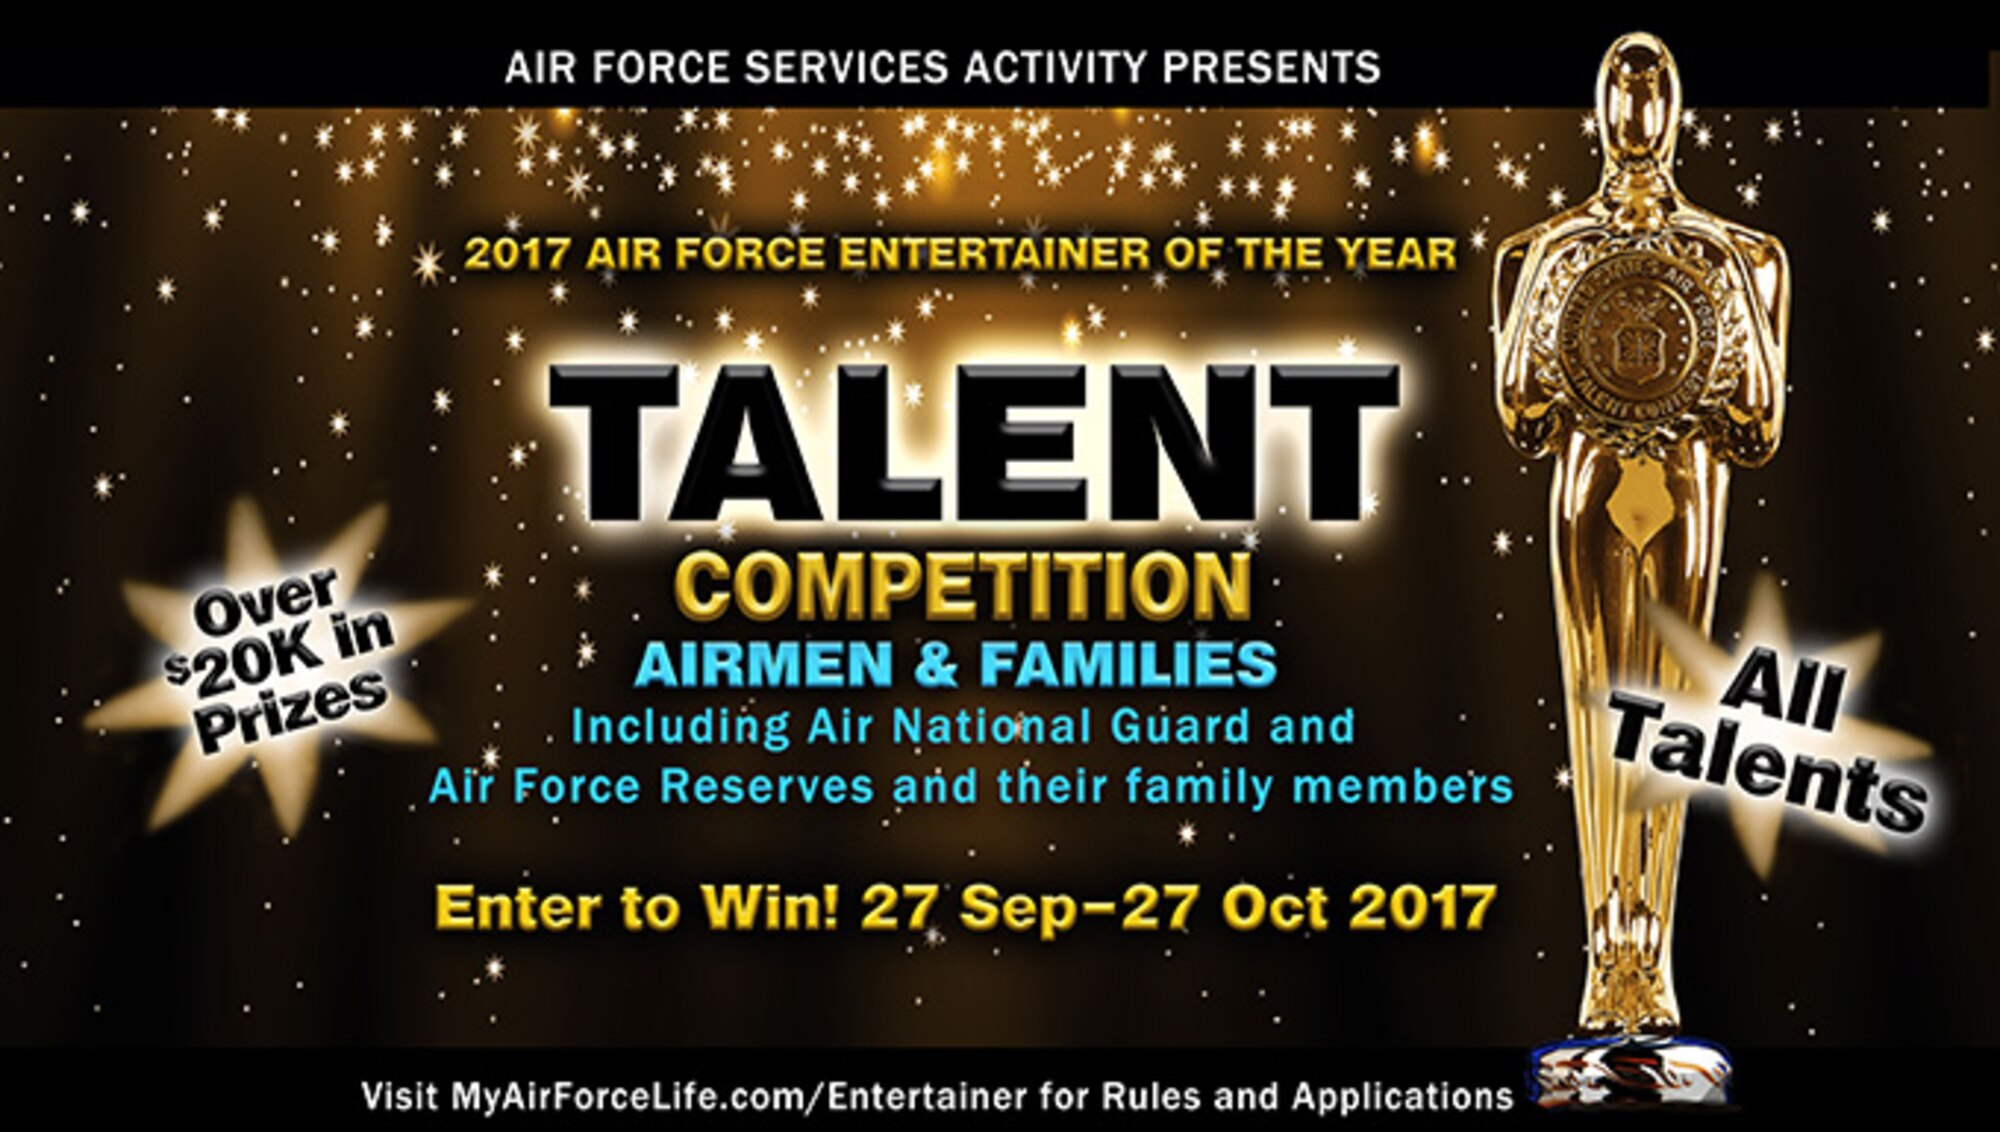 Entertainer of the Year contest